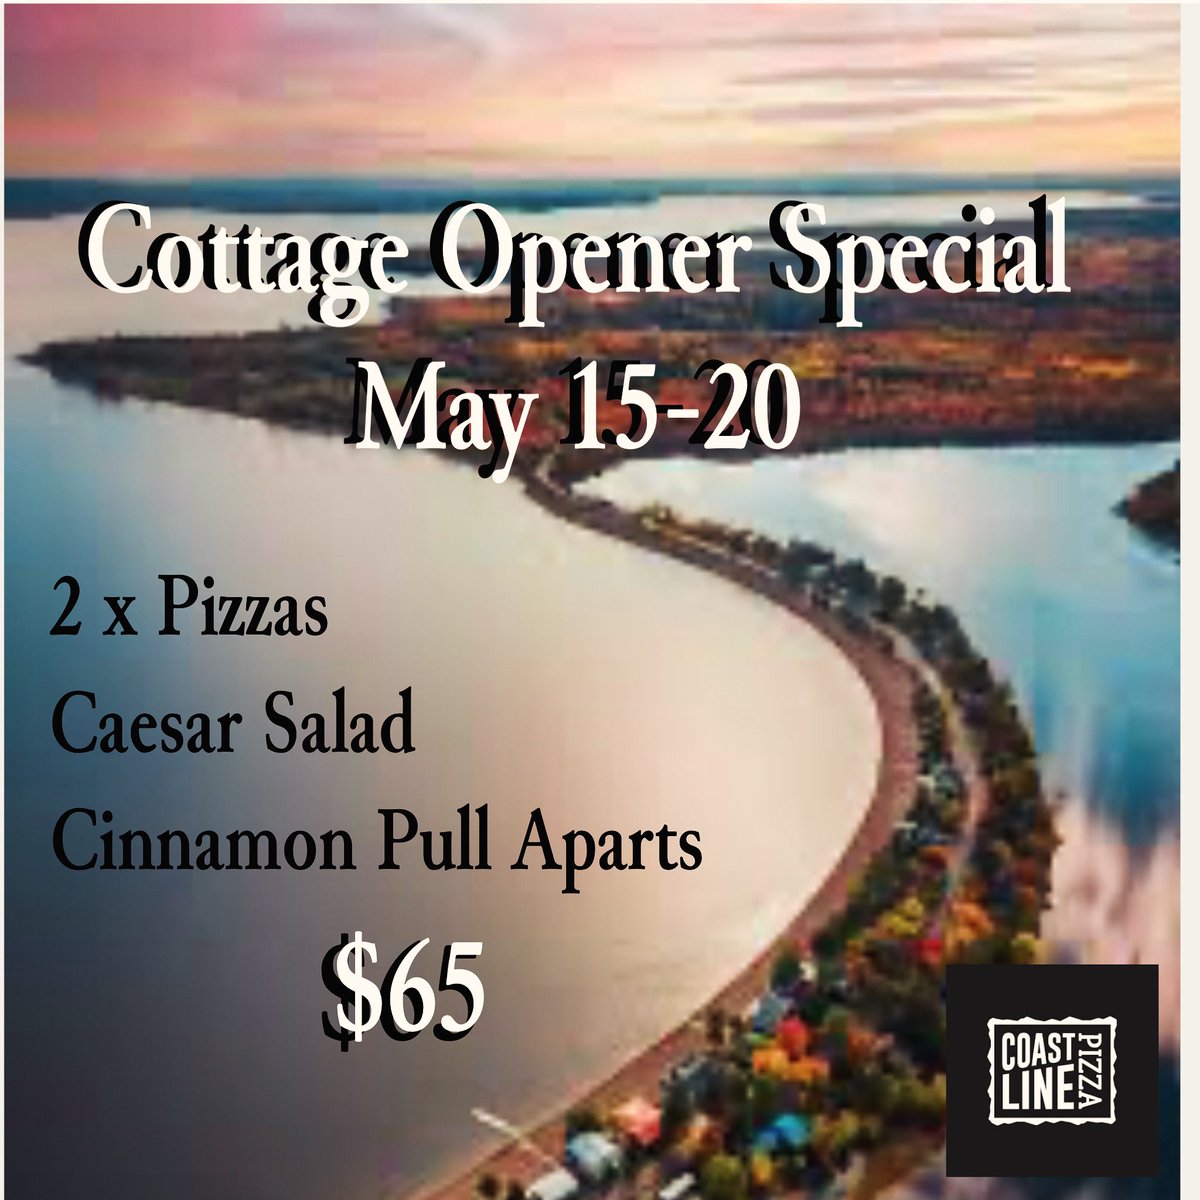 Gearing up for a big May 2-4? Here’s y a great package. Take it to the cottage for sustenance, or just bring it home for a post-gardening meal made easy! 💐 ☀️🏕️ Available from Wednesday, May 15 through Saturday , May 18, let us help make the long weekend food plan a breeze✌🏻